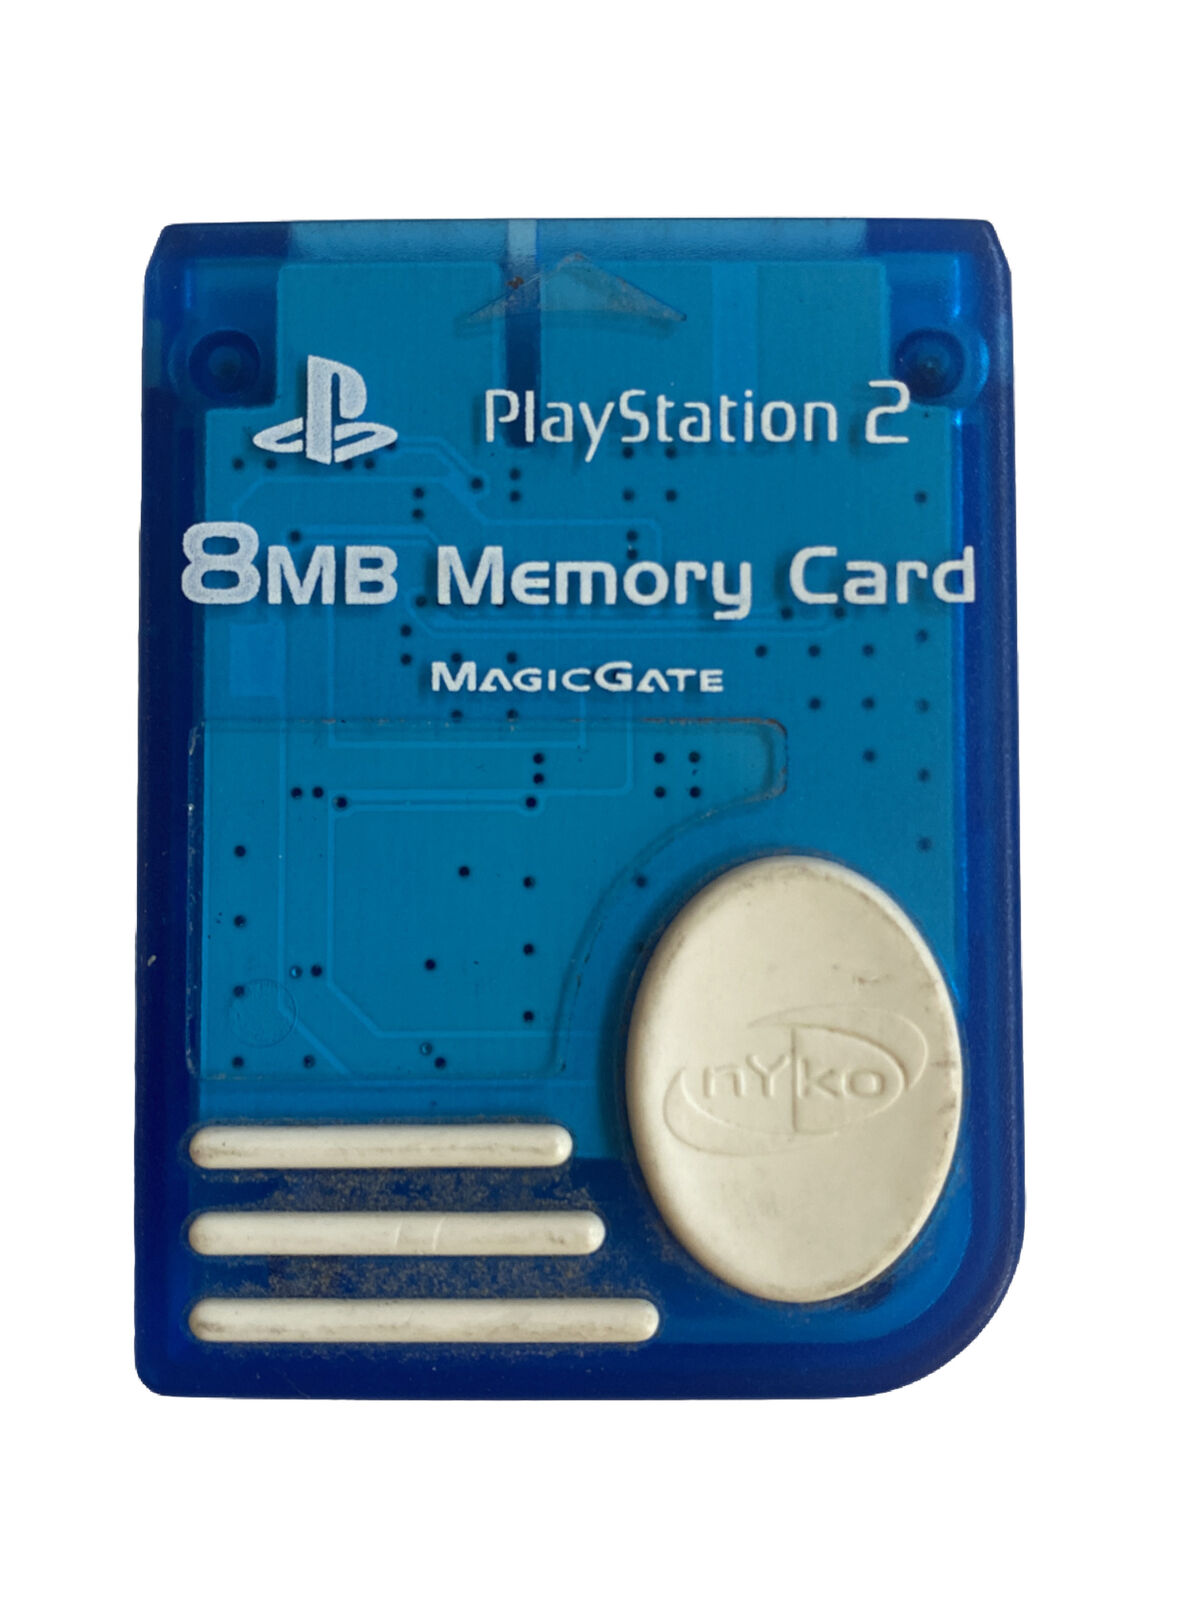 8MB Memory Card - Nyko  Playstation 2 Clear Blue | Galactic Gamez